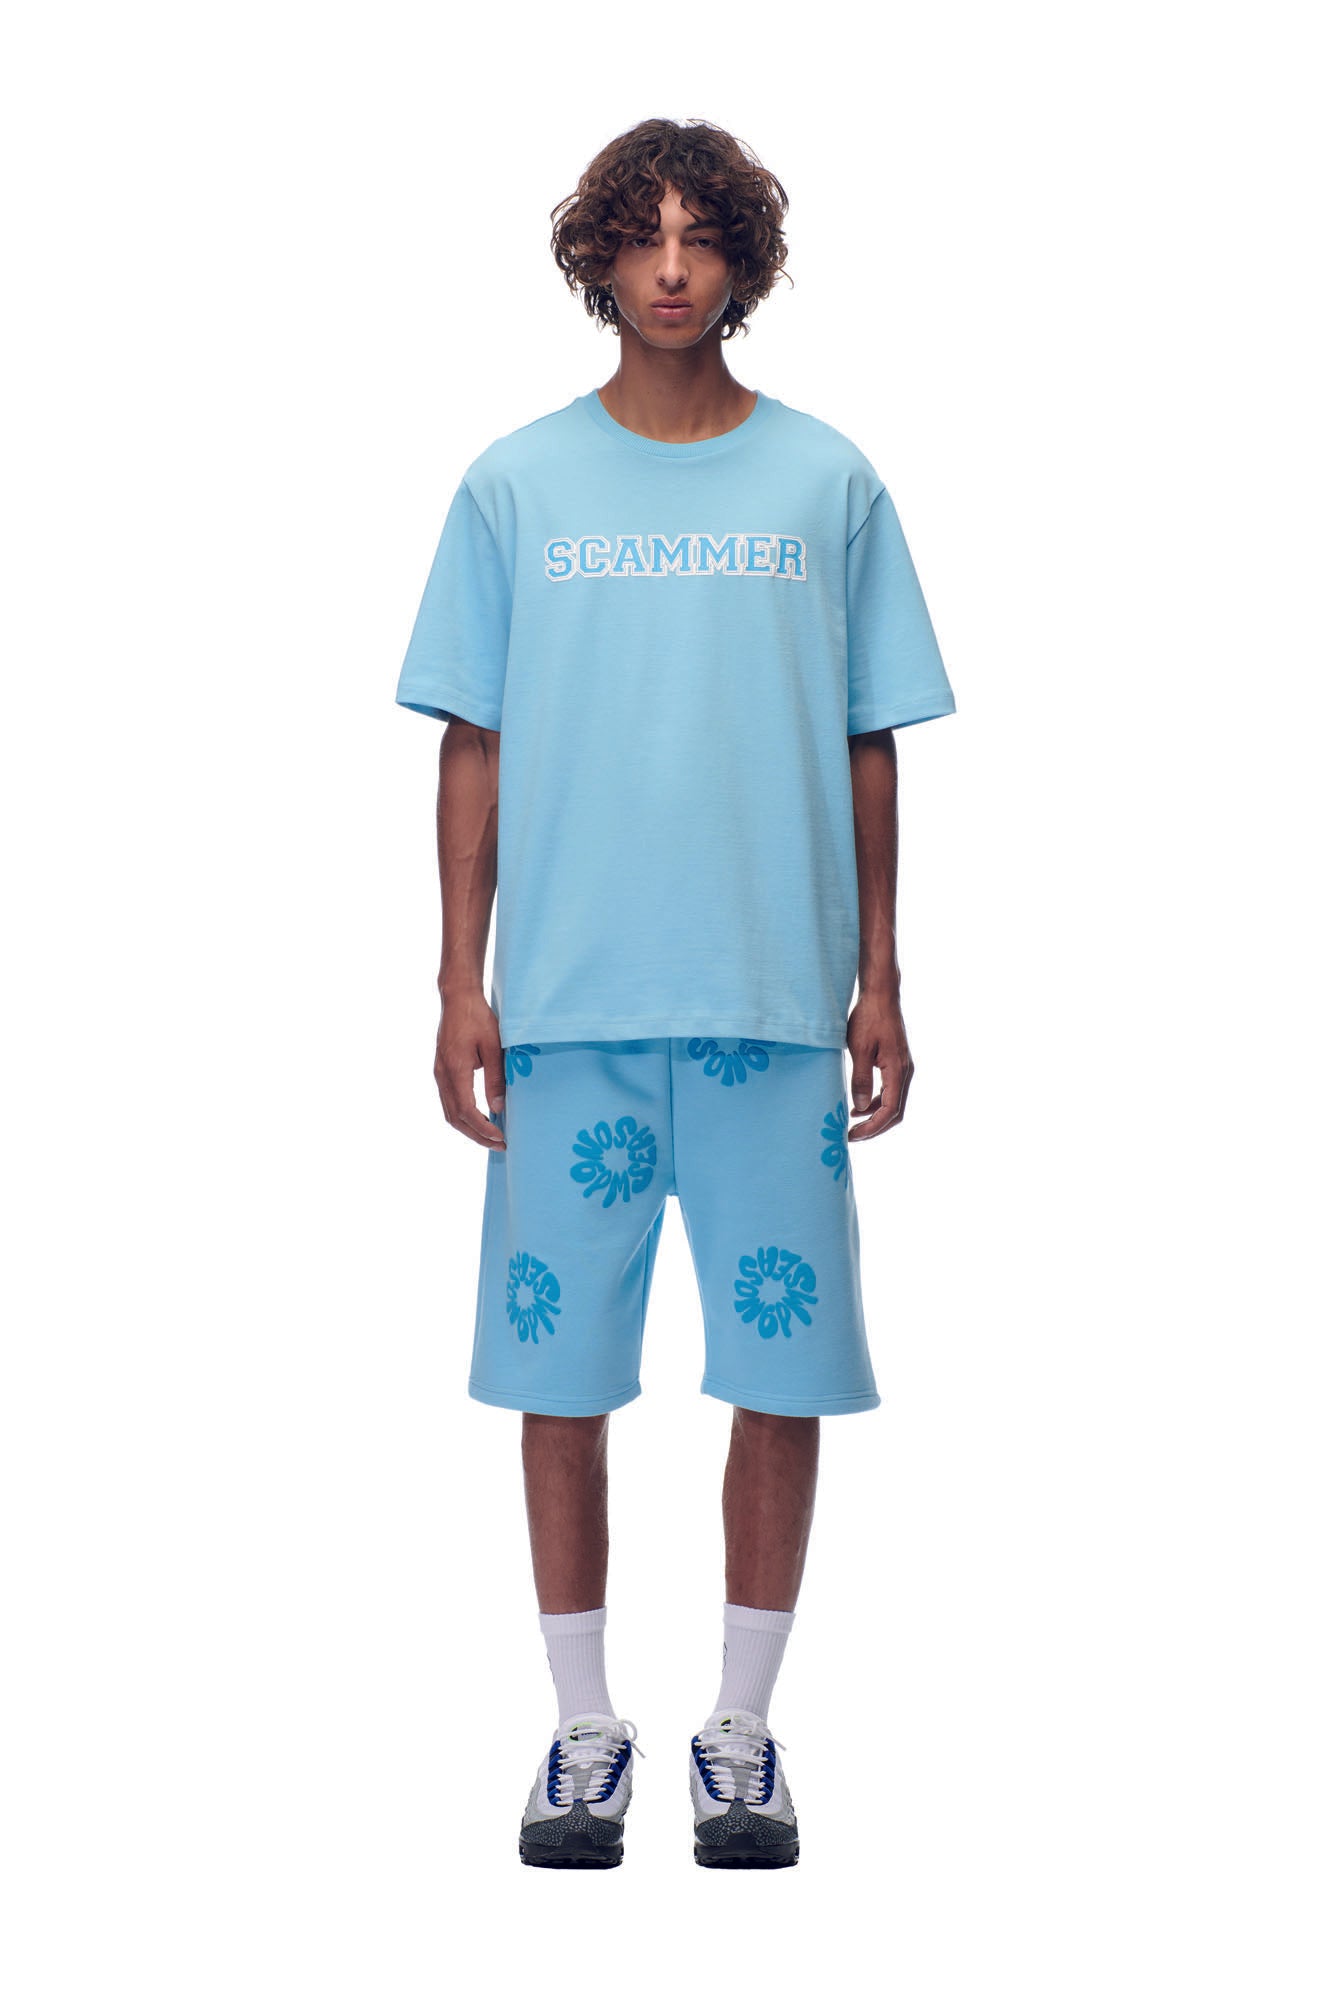 SCAMMER T-SHIRT BABY BLUE